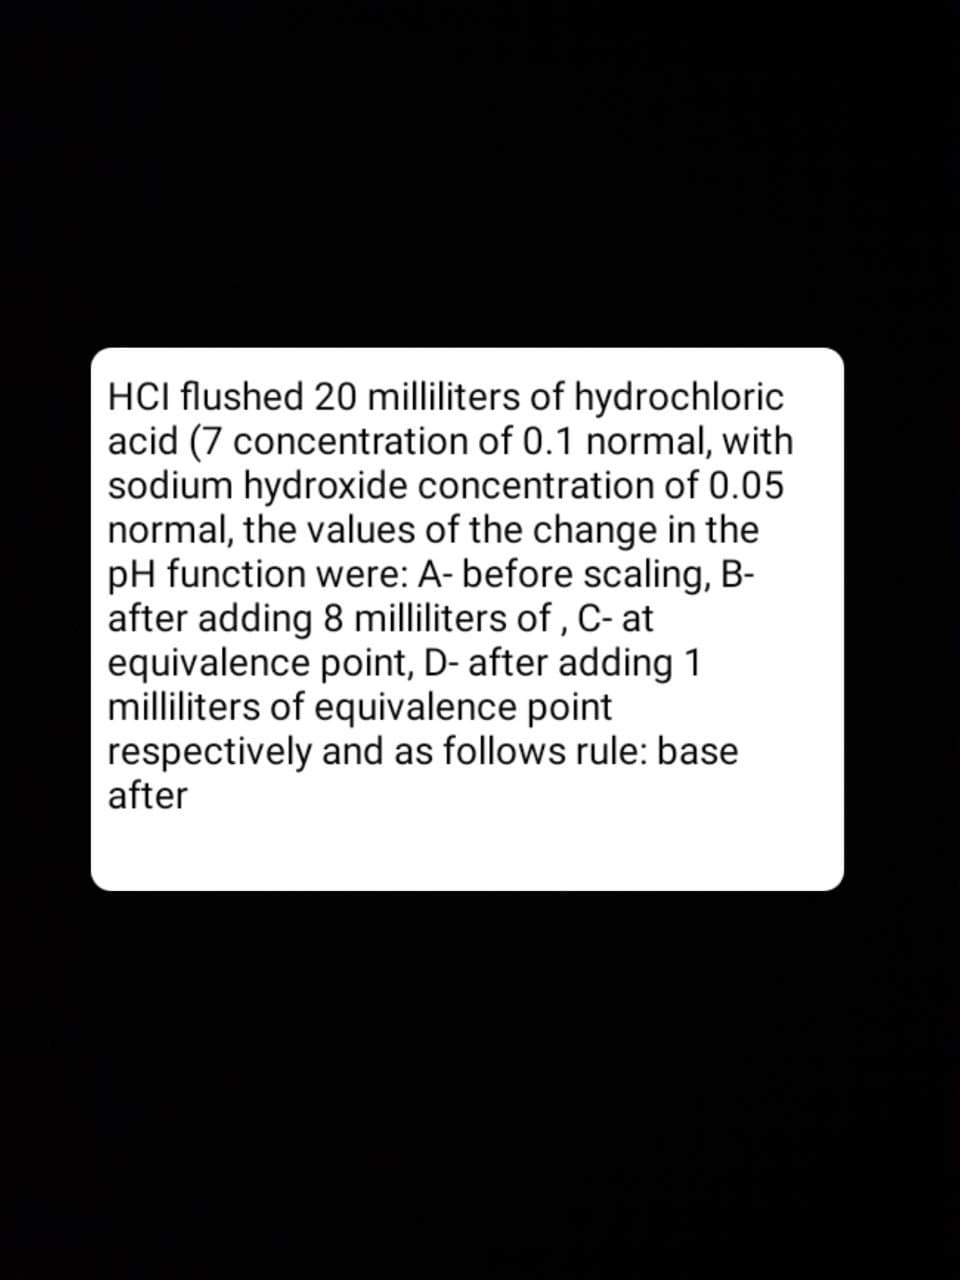 HCI flushed 20 milliliters of hydrochloric
acid (7 concentration of 0.1 normal, with
sodium hydroxide concentration of 0.05
normal, the values of the change in the
pH function were: A- before scaling, B-
after adding 8 milliliters of , C- at
equivalence point, D- after adding 1
milliliters of equivalence point
respectively and as follows rule: base
after
